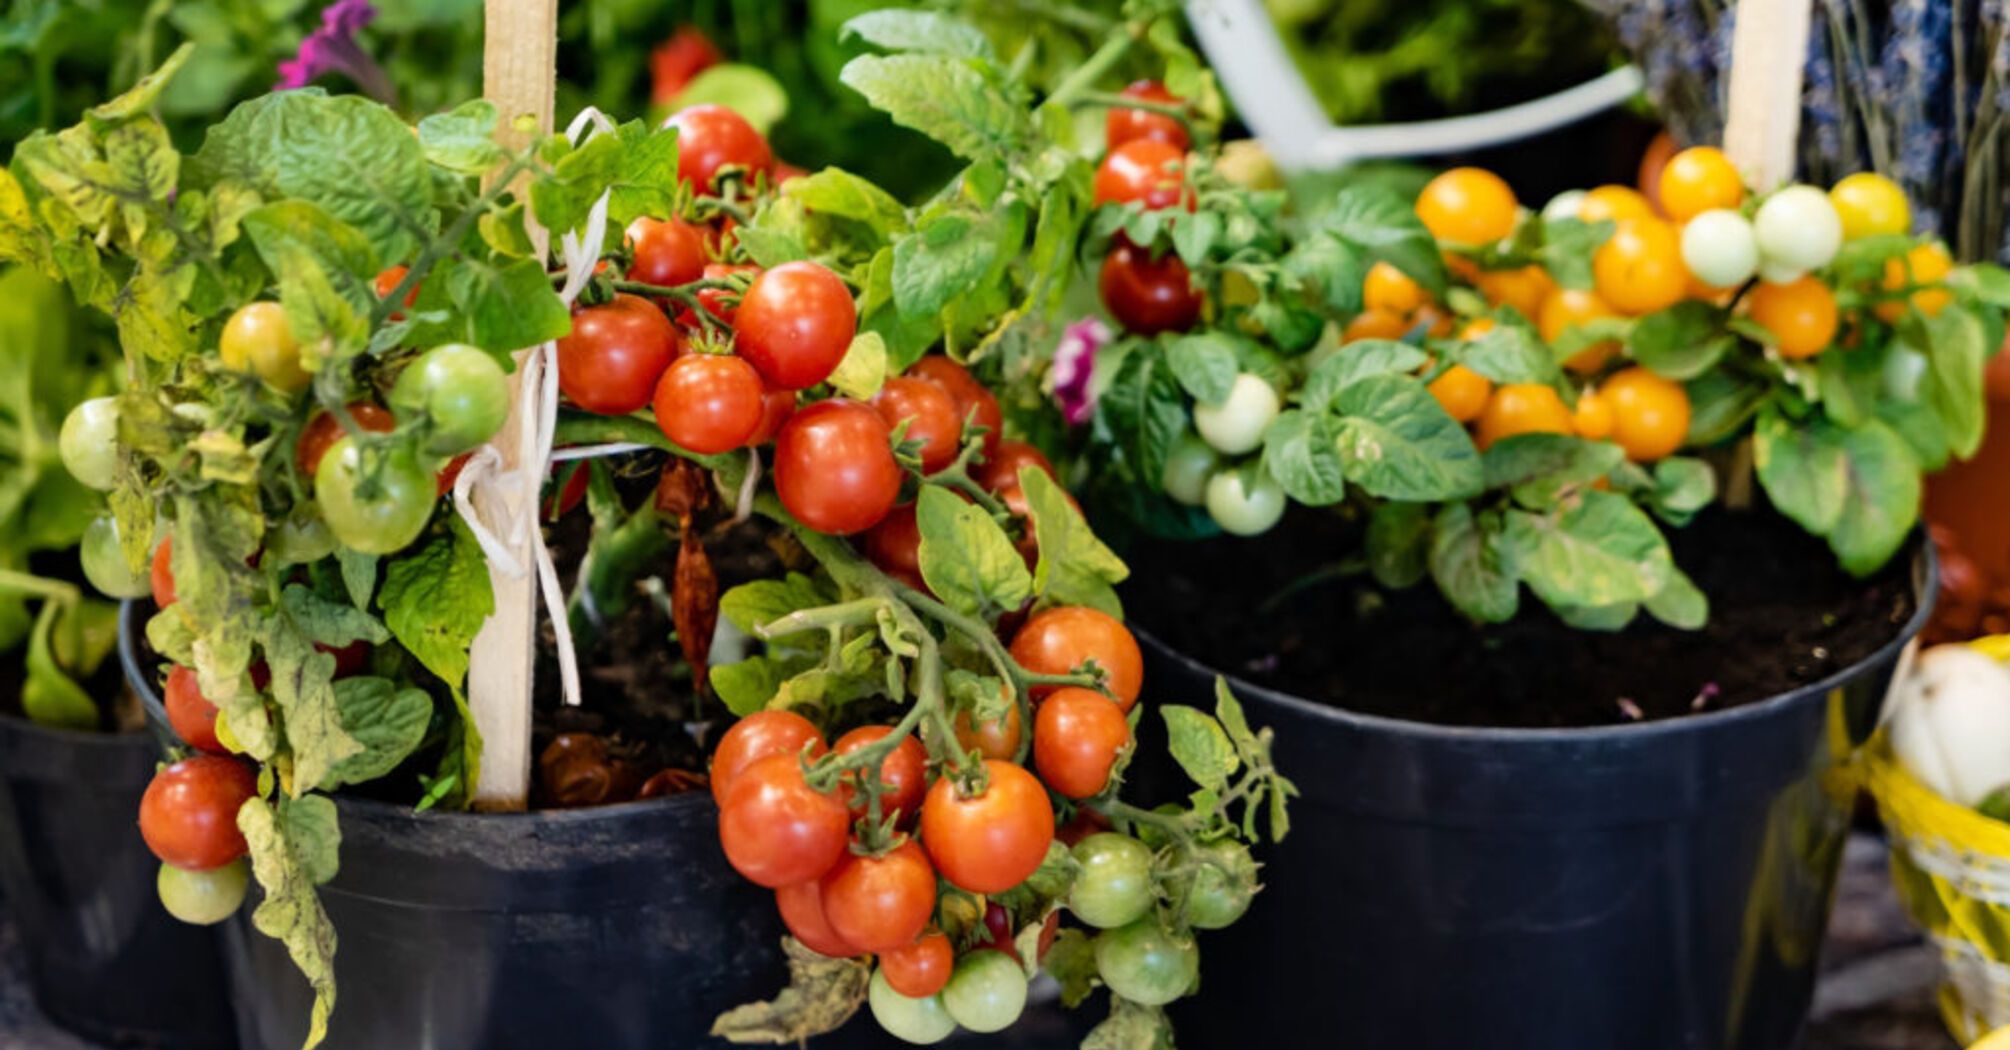 Fertilizer that accelerates the growth of tomato and pepper seedlings